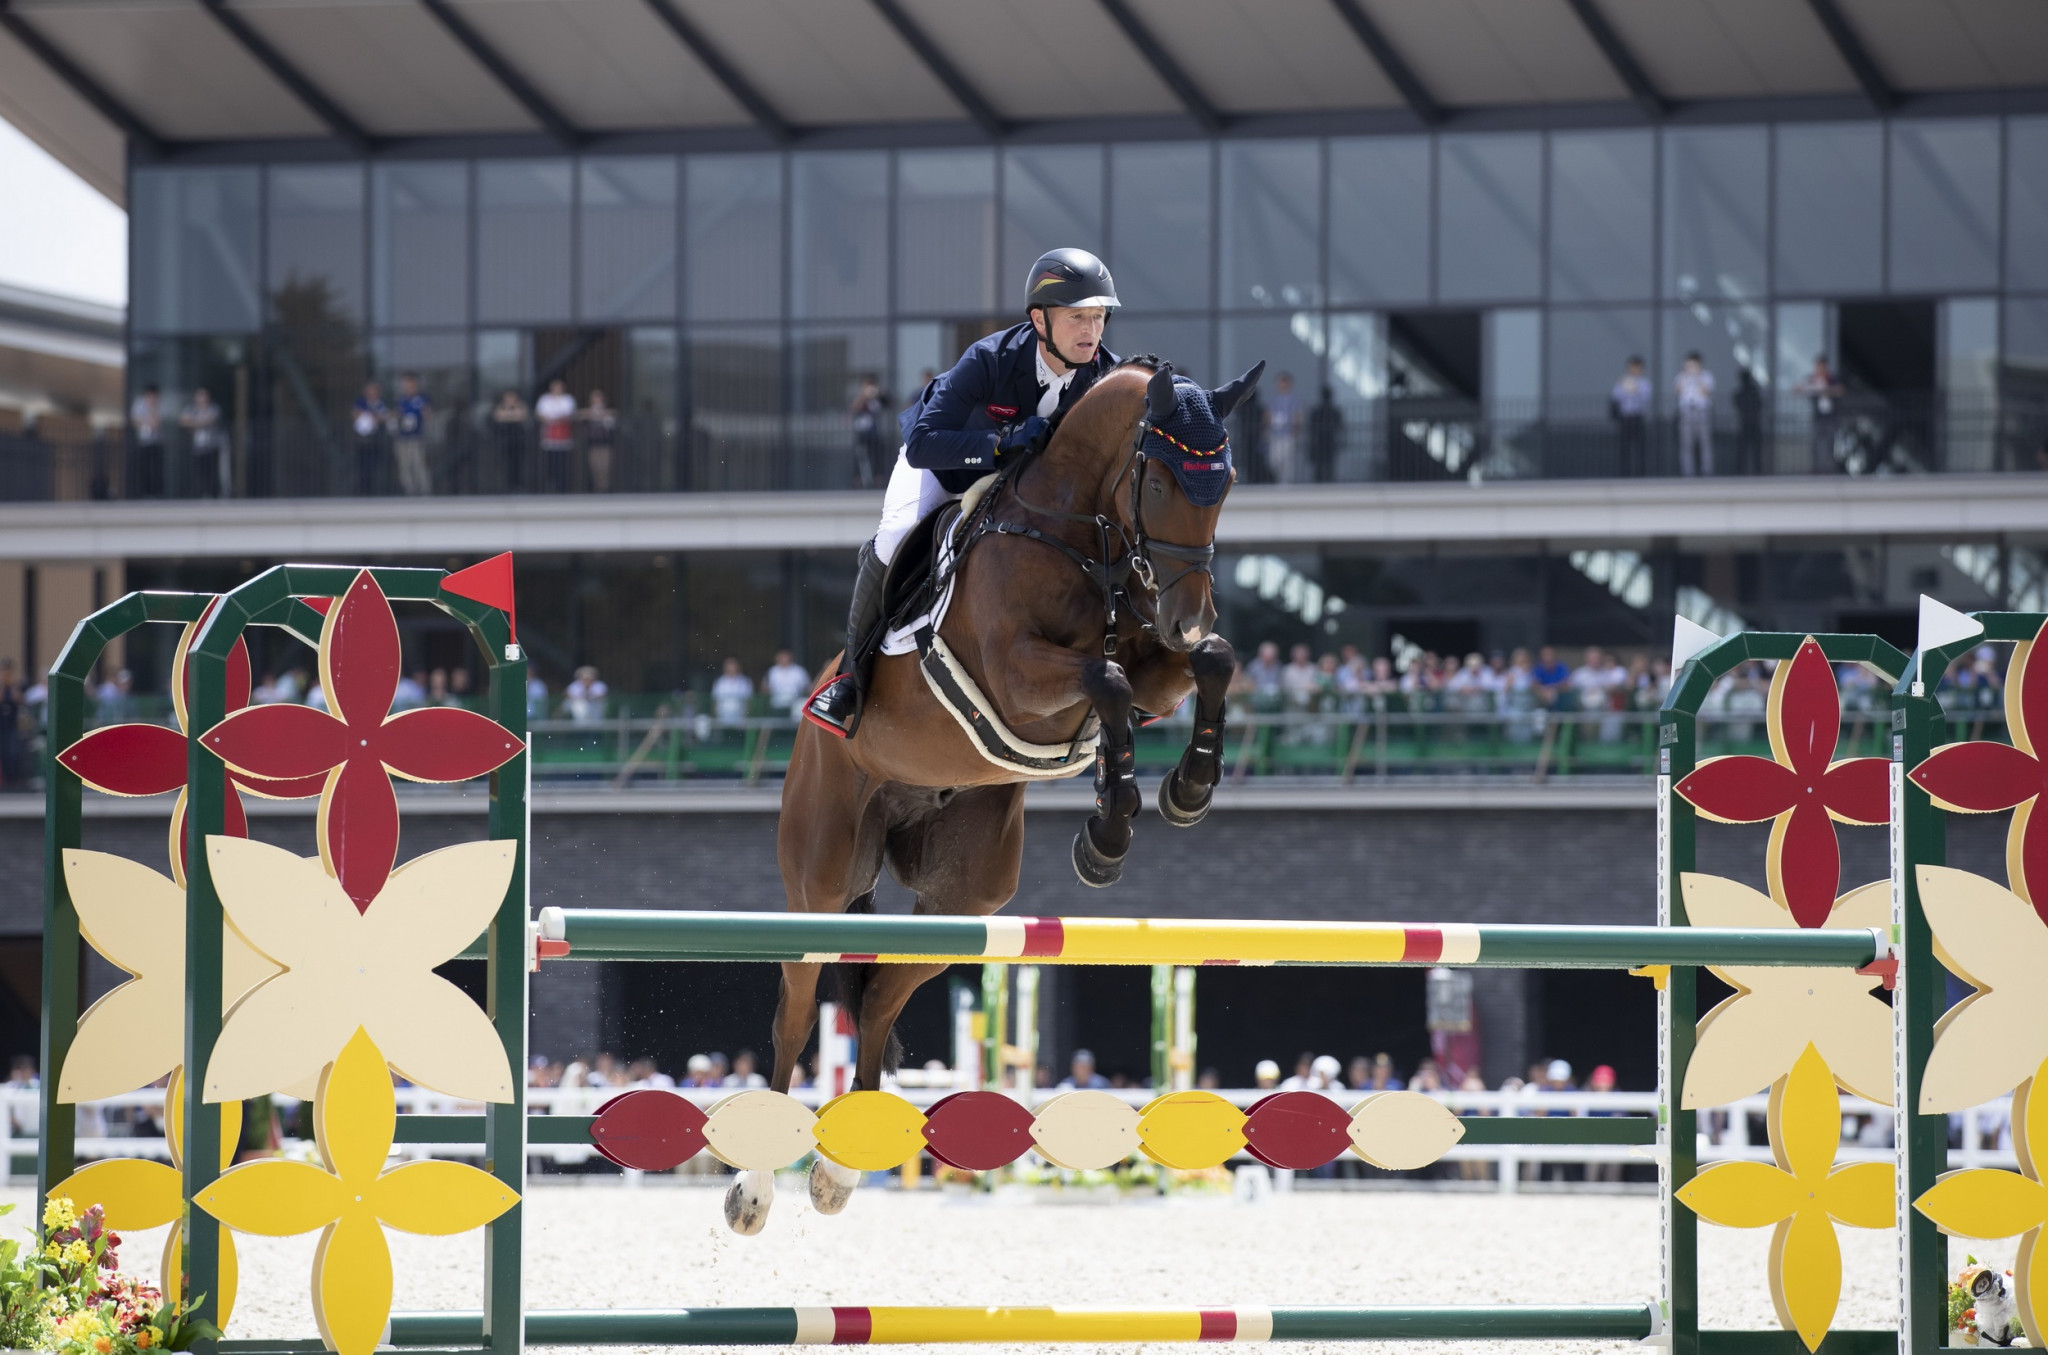 Germany’s Michael Jung claimed top honours with Fischerwild Wave as the eventing test event for the Tokyo 2020 Olympic Games concluded at Equestrian Park today ©FEI/Yusuke Nakanishi